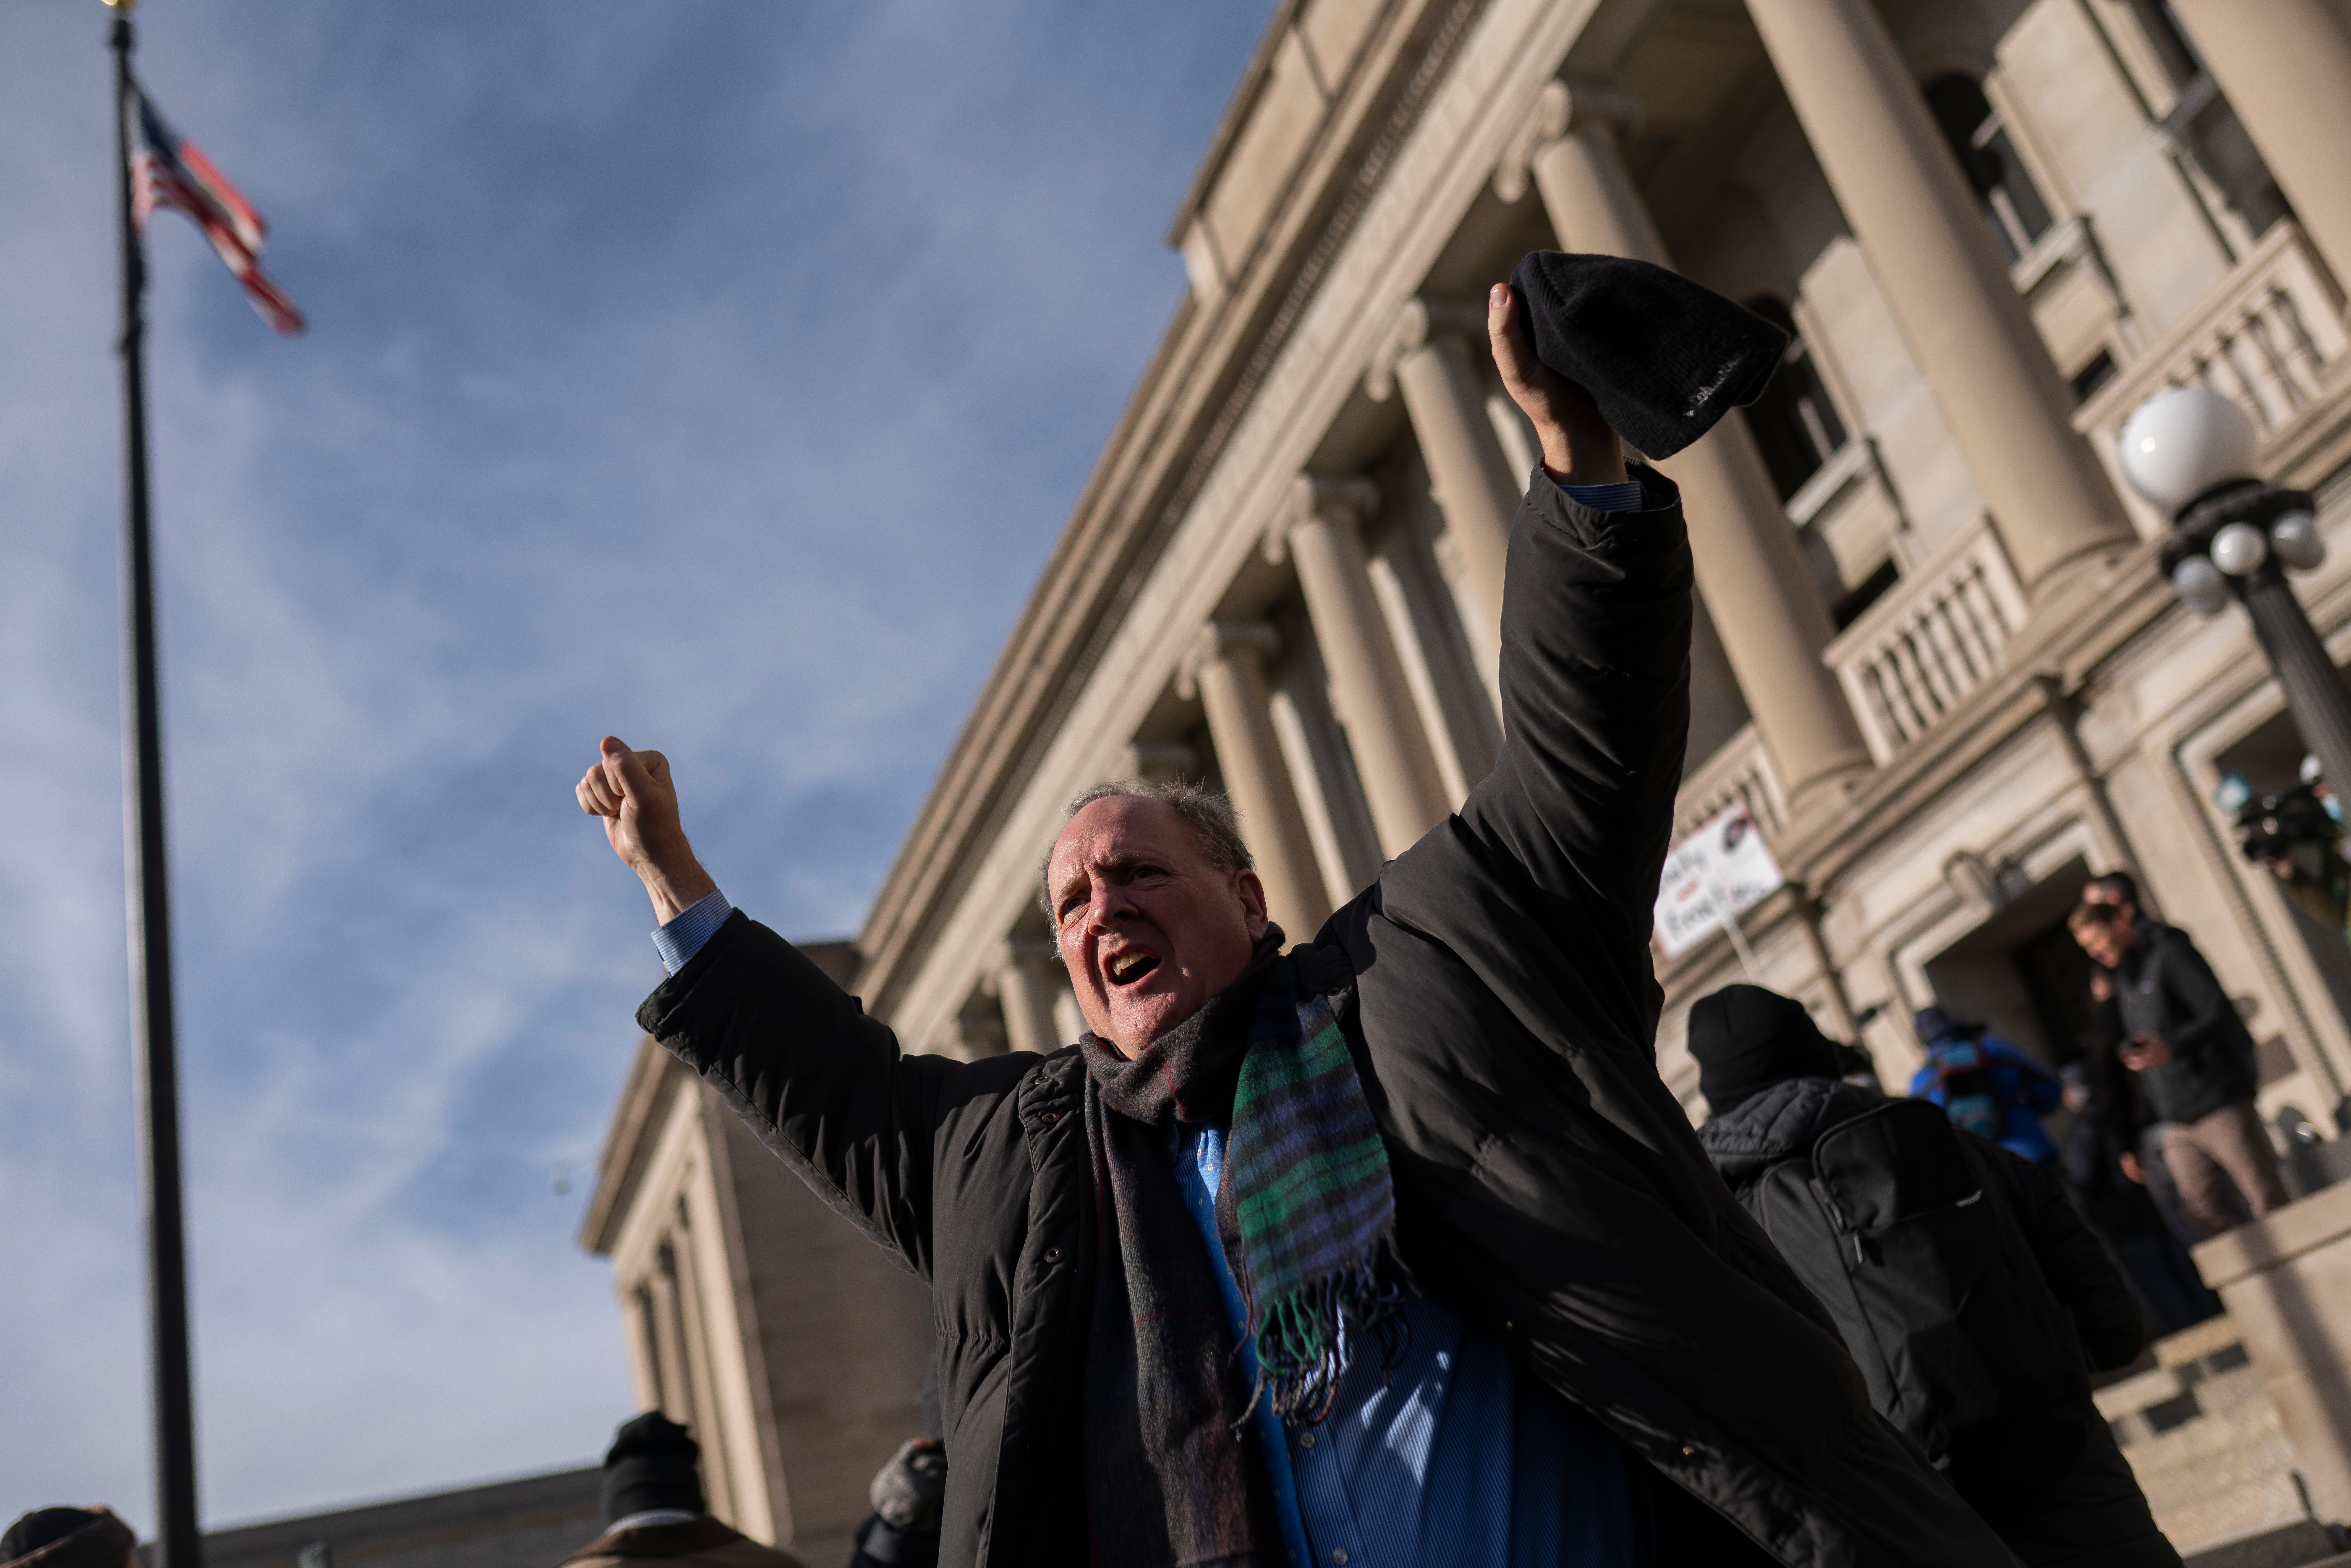 A supporter of Kyle Rittenhouse reacts as a not guilty verdict is read in front of the Kenosha County Courthouse on November 19, 2021 in Kenosha, Wisconsin